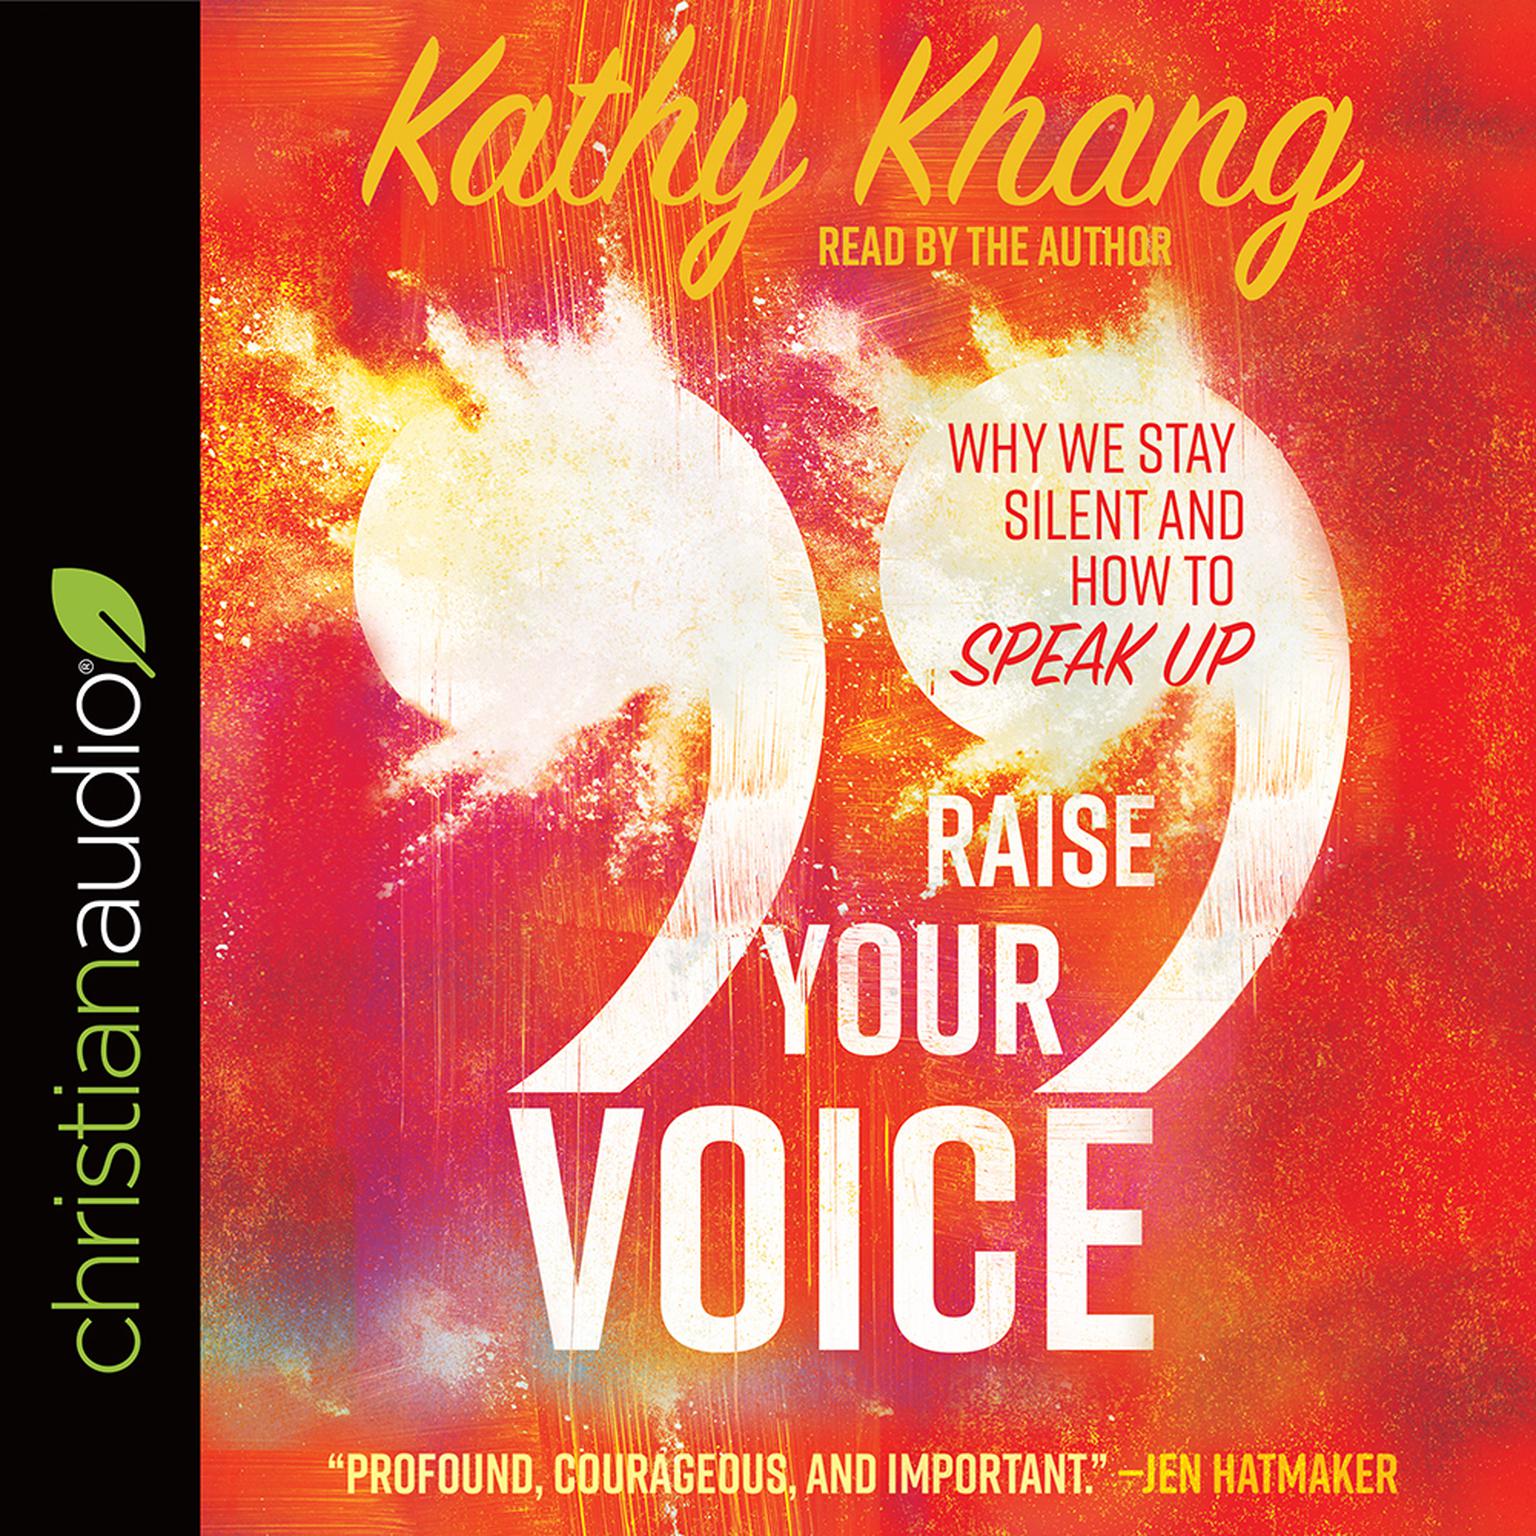 Raise Your Voice: Why We Stay Silent and How to Speak Up Audiobook, by Kathy Khang